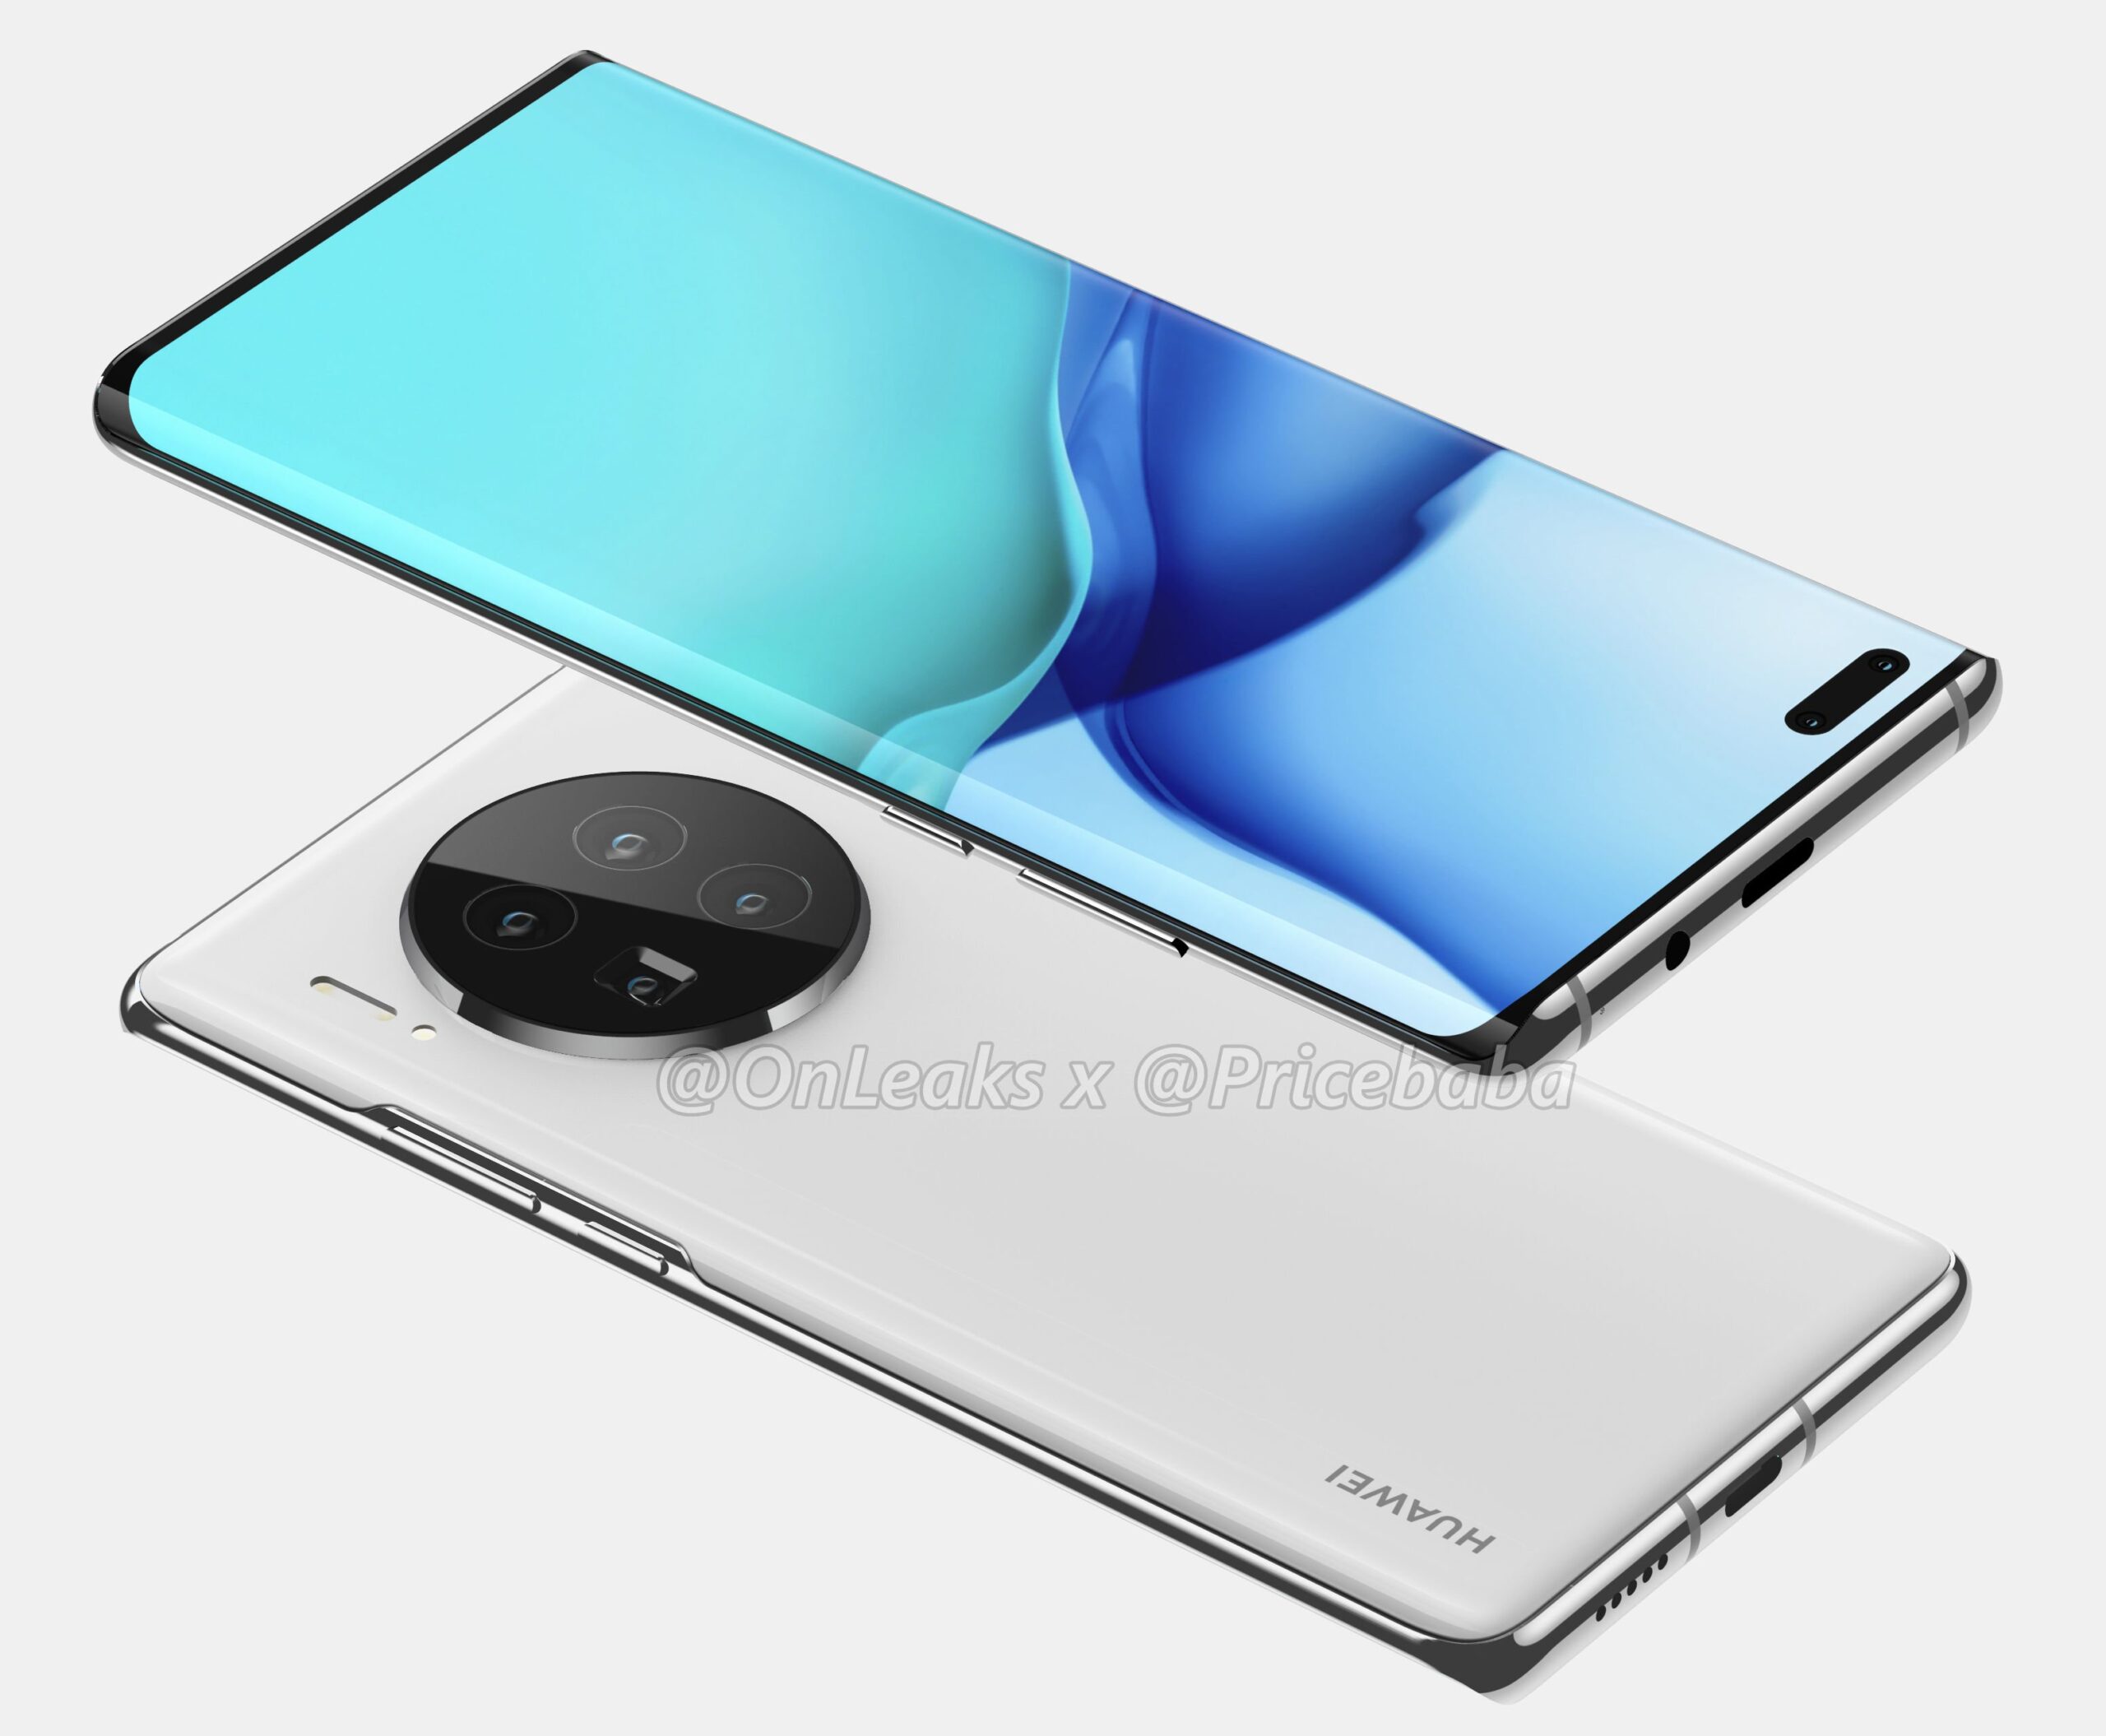 Huawei Mate 40 Pro renders surfaces too with a curvier display and an extra camera